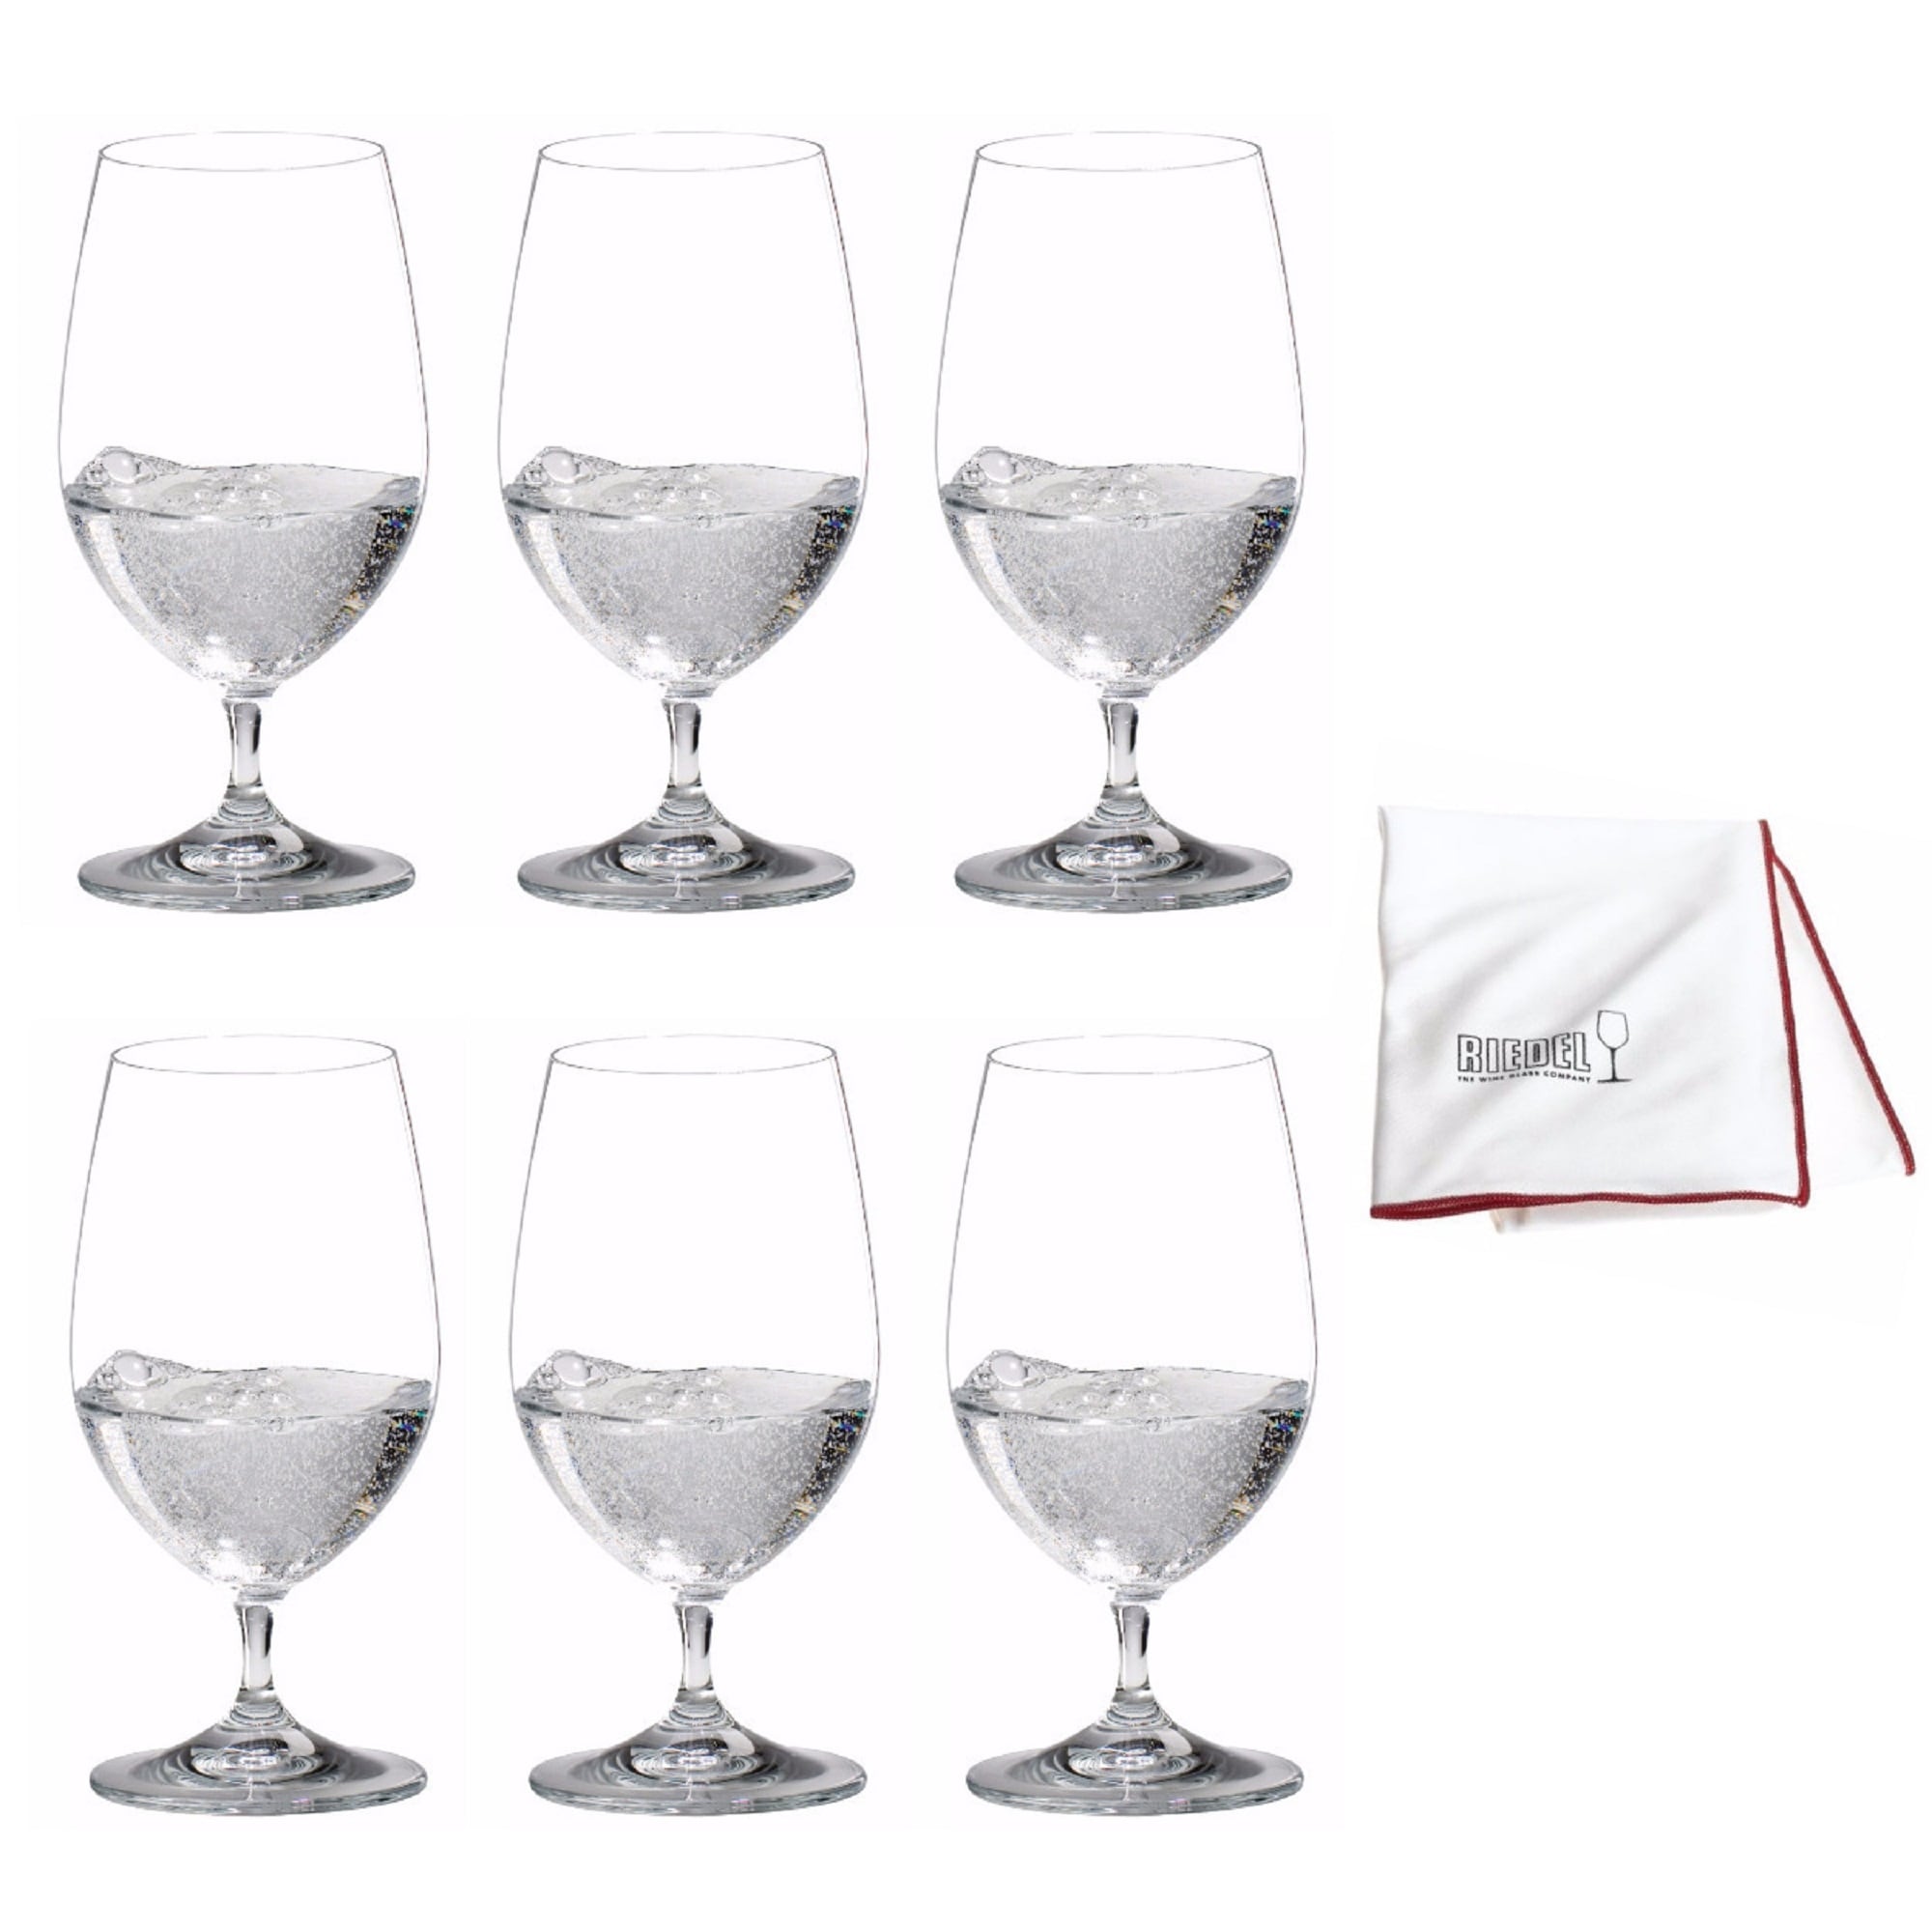 https://ak1.ostkcdn.com/images/products/is/images/direct/496c0bfd64d2d9a6101d1872484f1363c67b9bec/Riedel-Vinum-Gourmet-Glass-%28Set-of-6%29-with-Microfiber-Polishing-Cloth.jpg